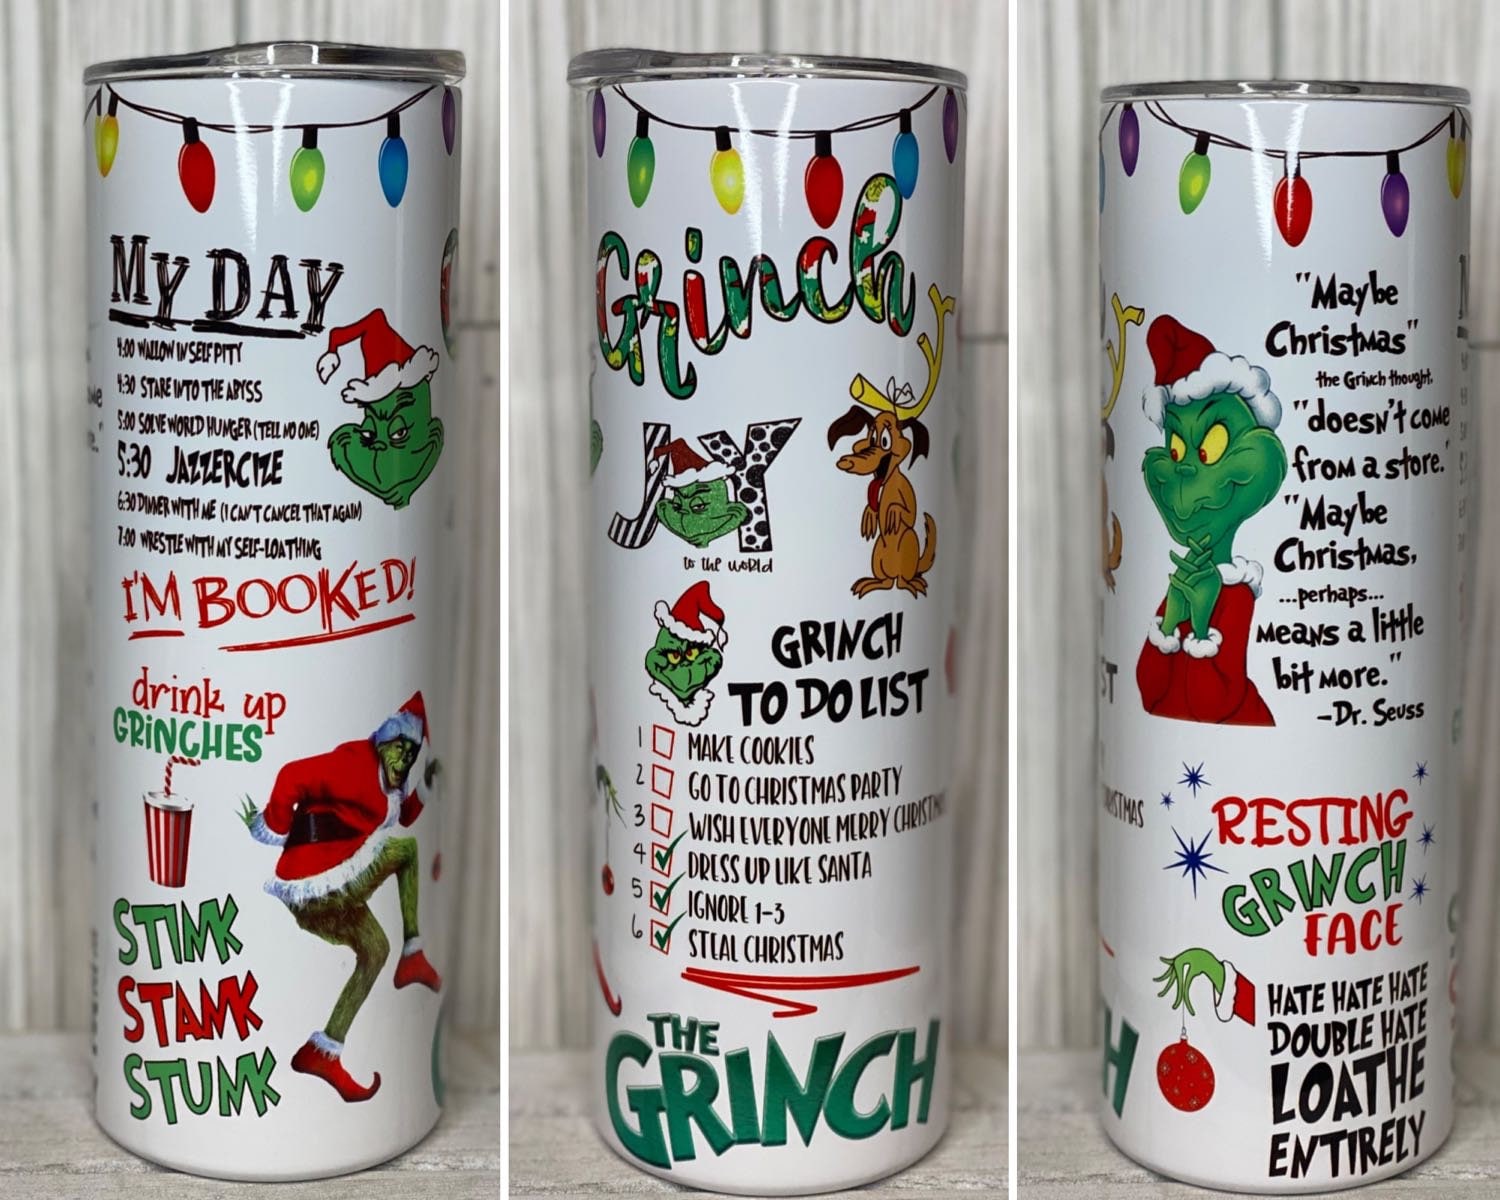 THE GRINCH Christmas Stainless Steel Water Bottle 25 oz Dr. Suess